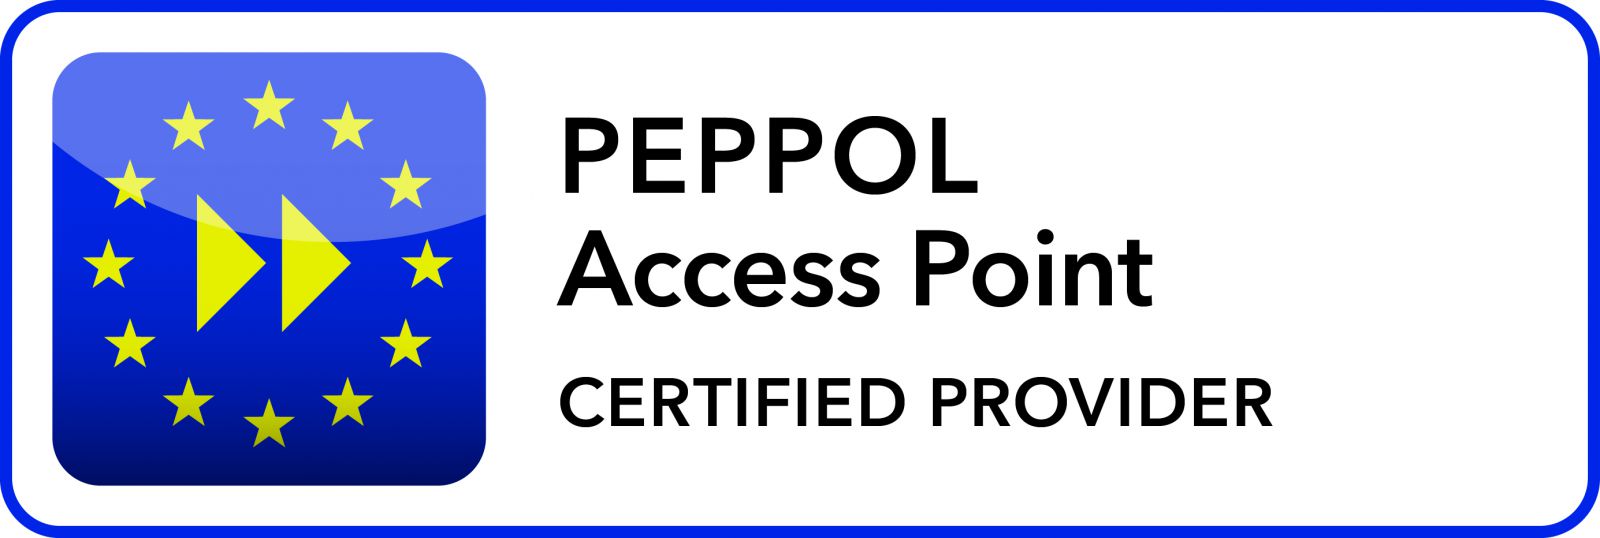 Peppol Certified Access Point Provider logo